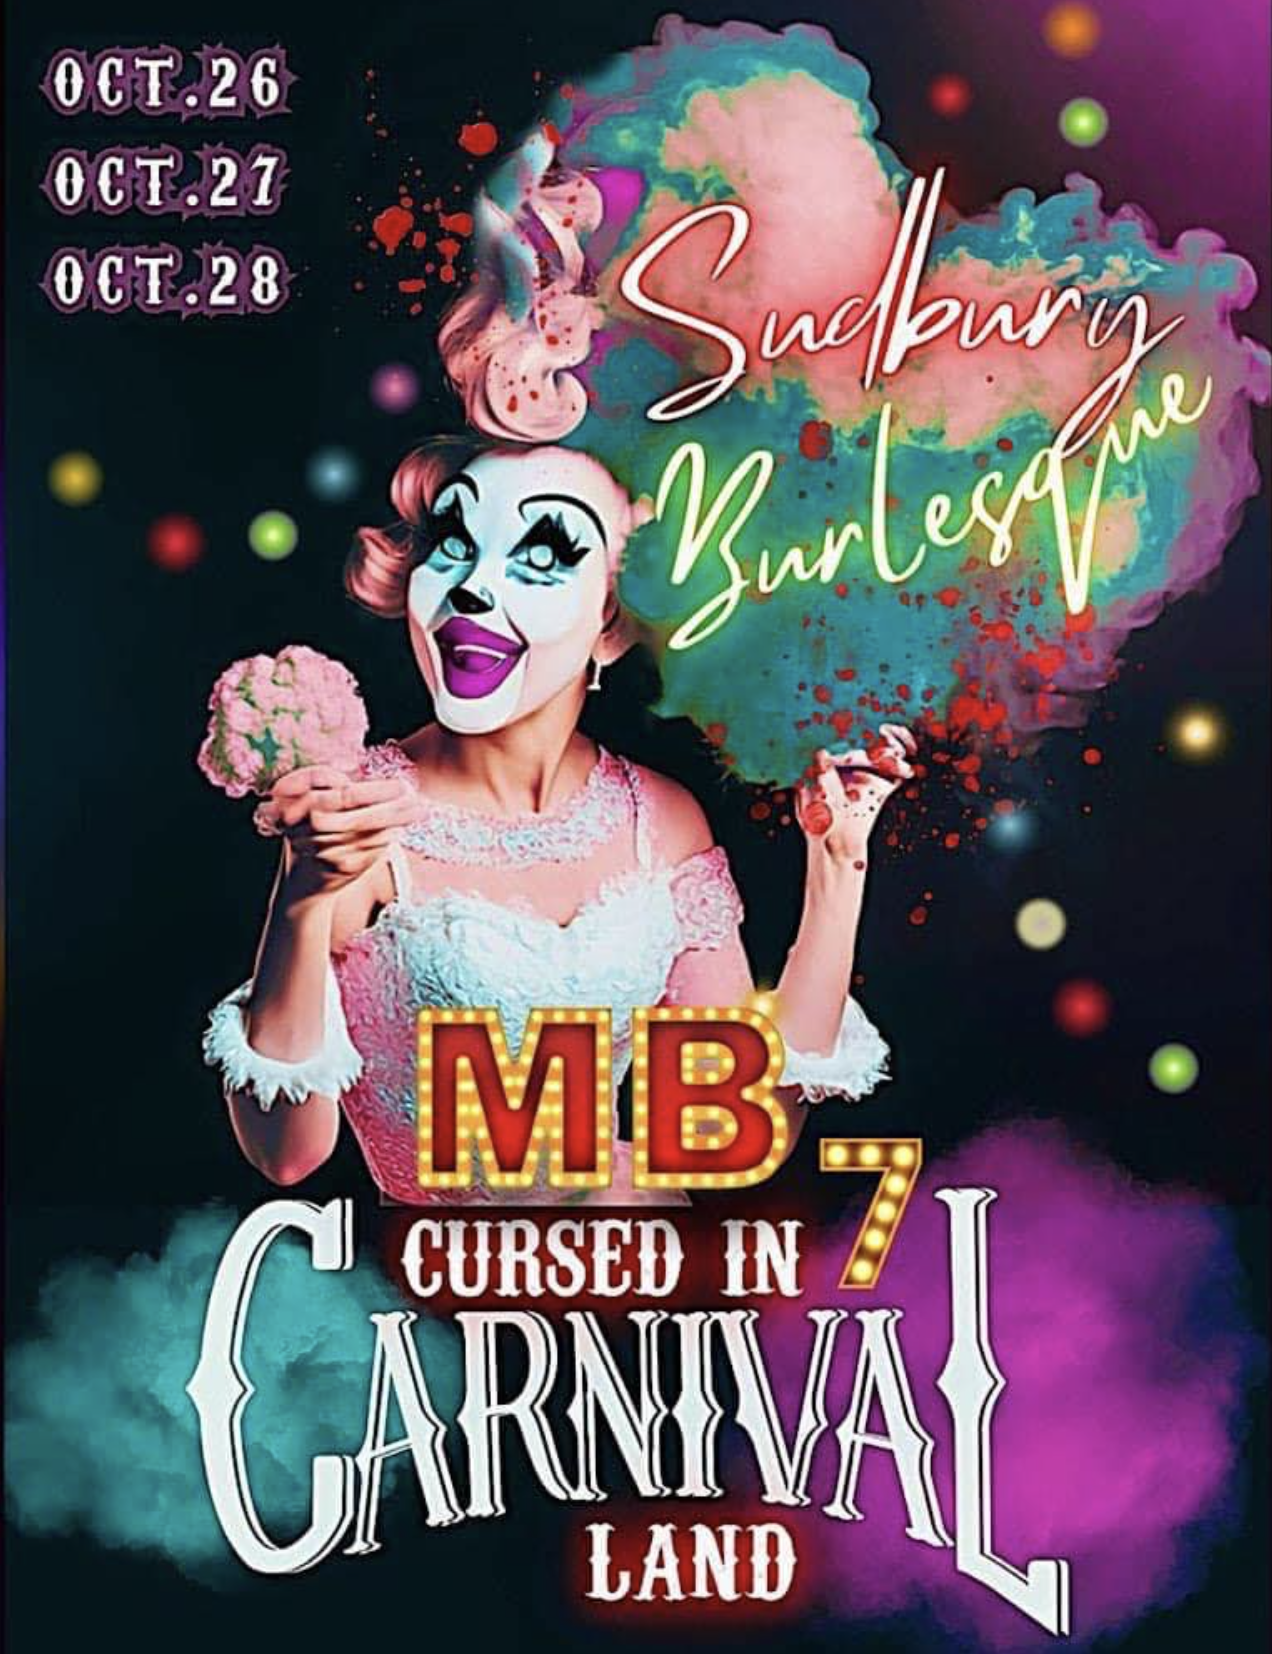 a burlesque performer in elegant clown makeup in a poster for "Cursed in Carnival Land"